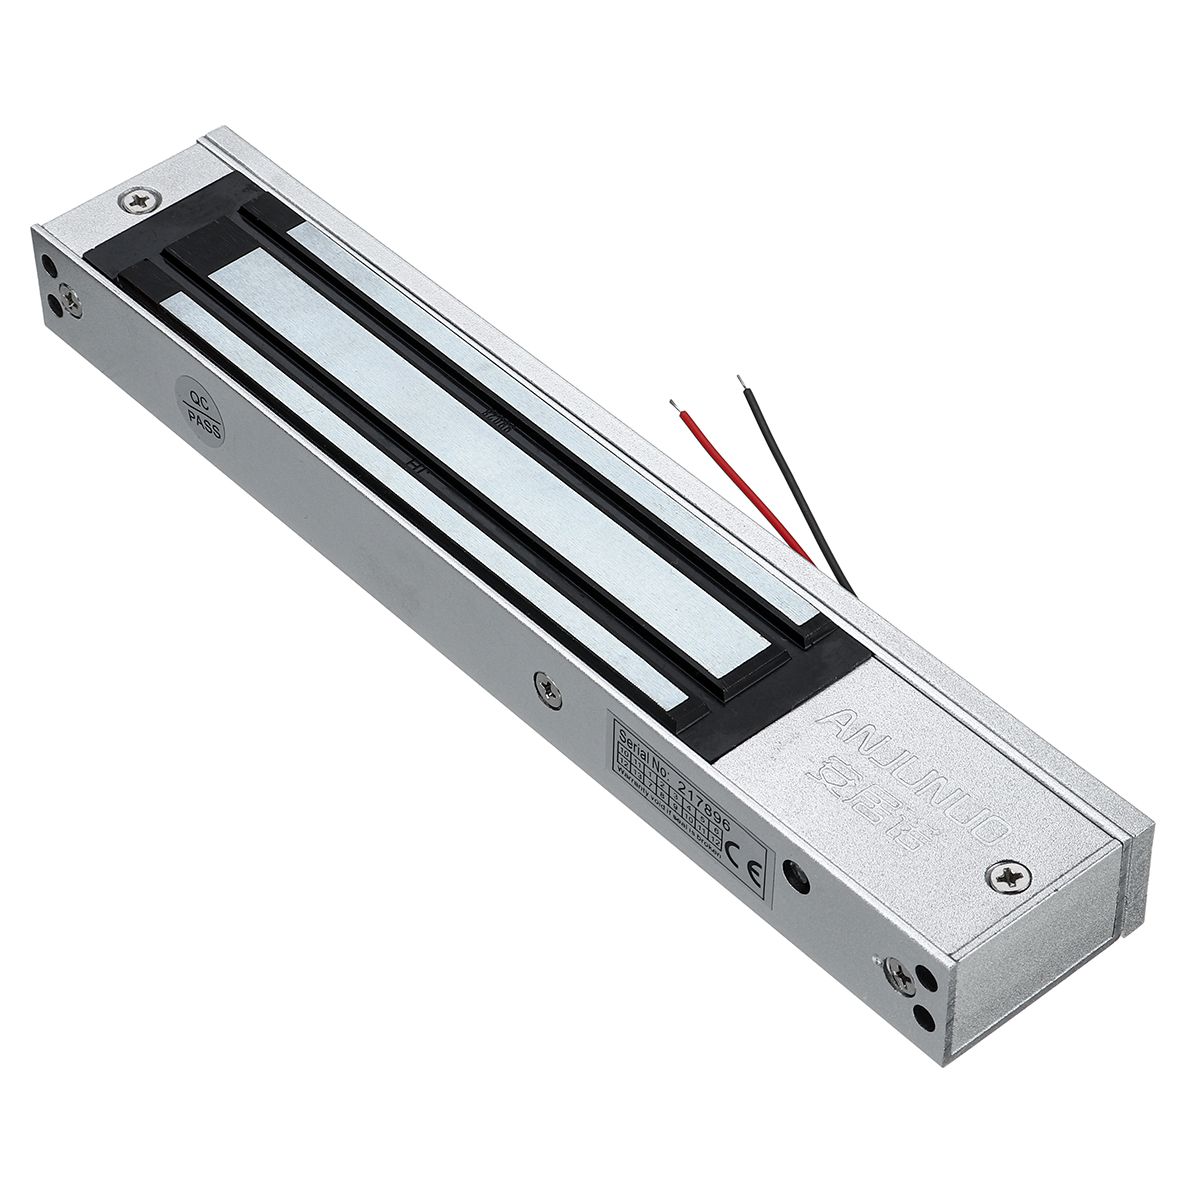 12V-Electric-Magnetic-Lock-280KG-600Lbs-Holding-Force-Door-Entry-Access-Control-Security-Lock-Electr-1587168